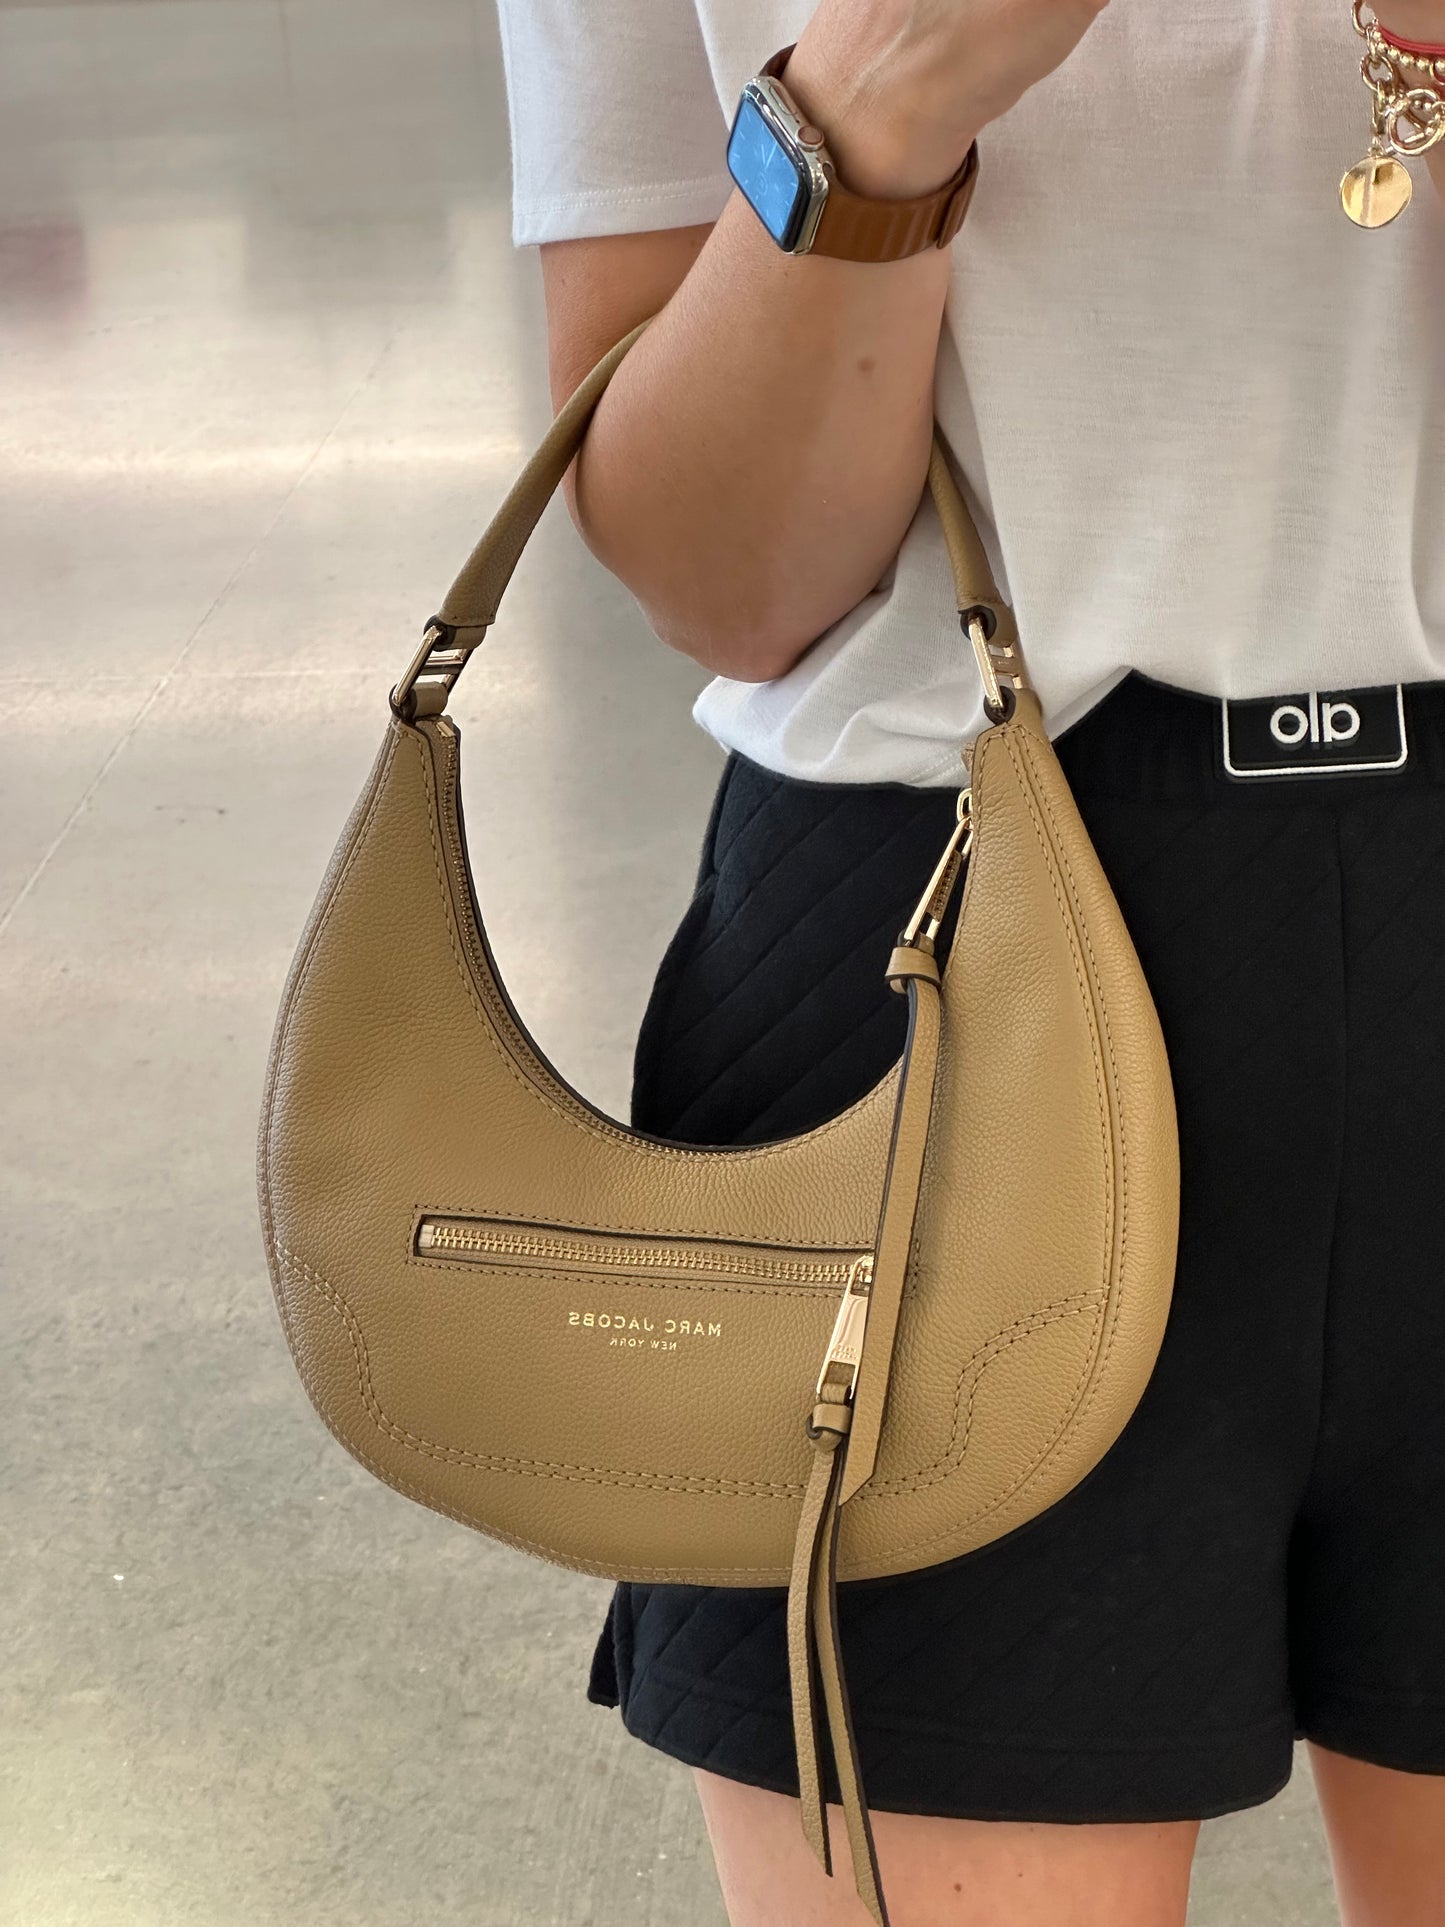 The popular Marc Jacobs Shoulder Bags you need to know about